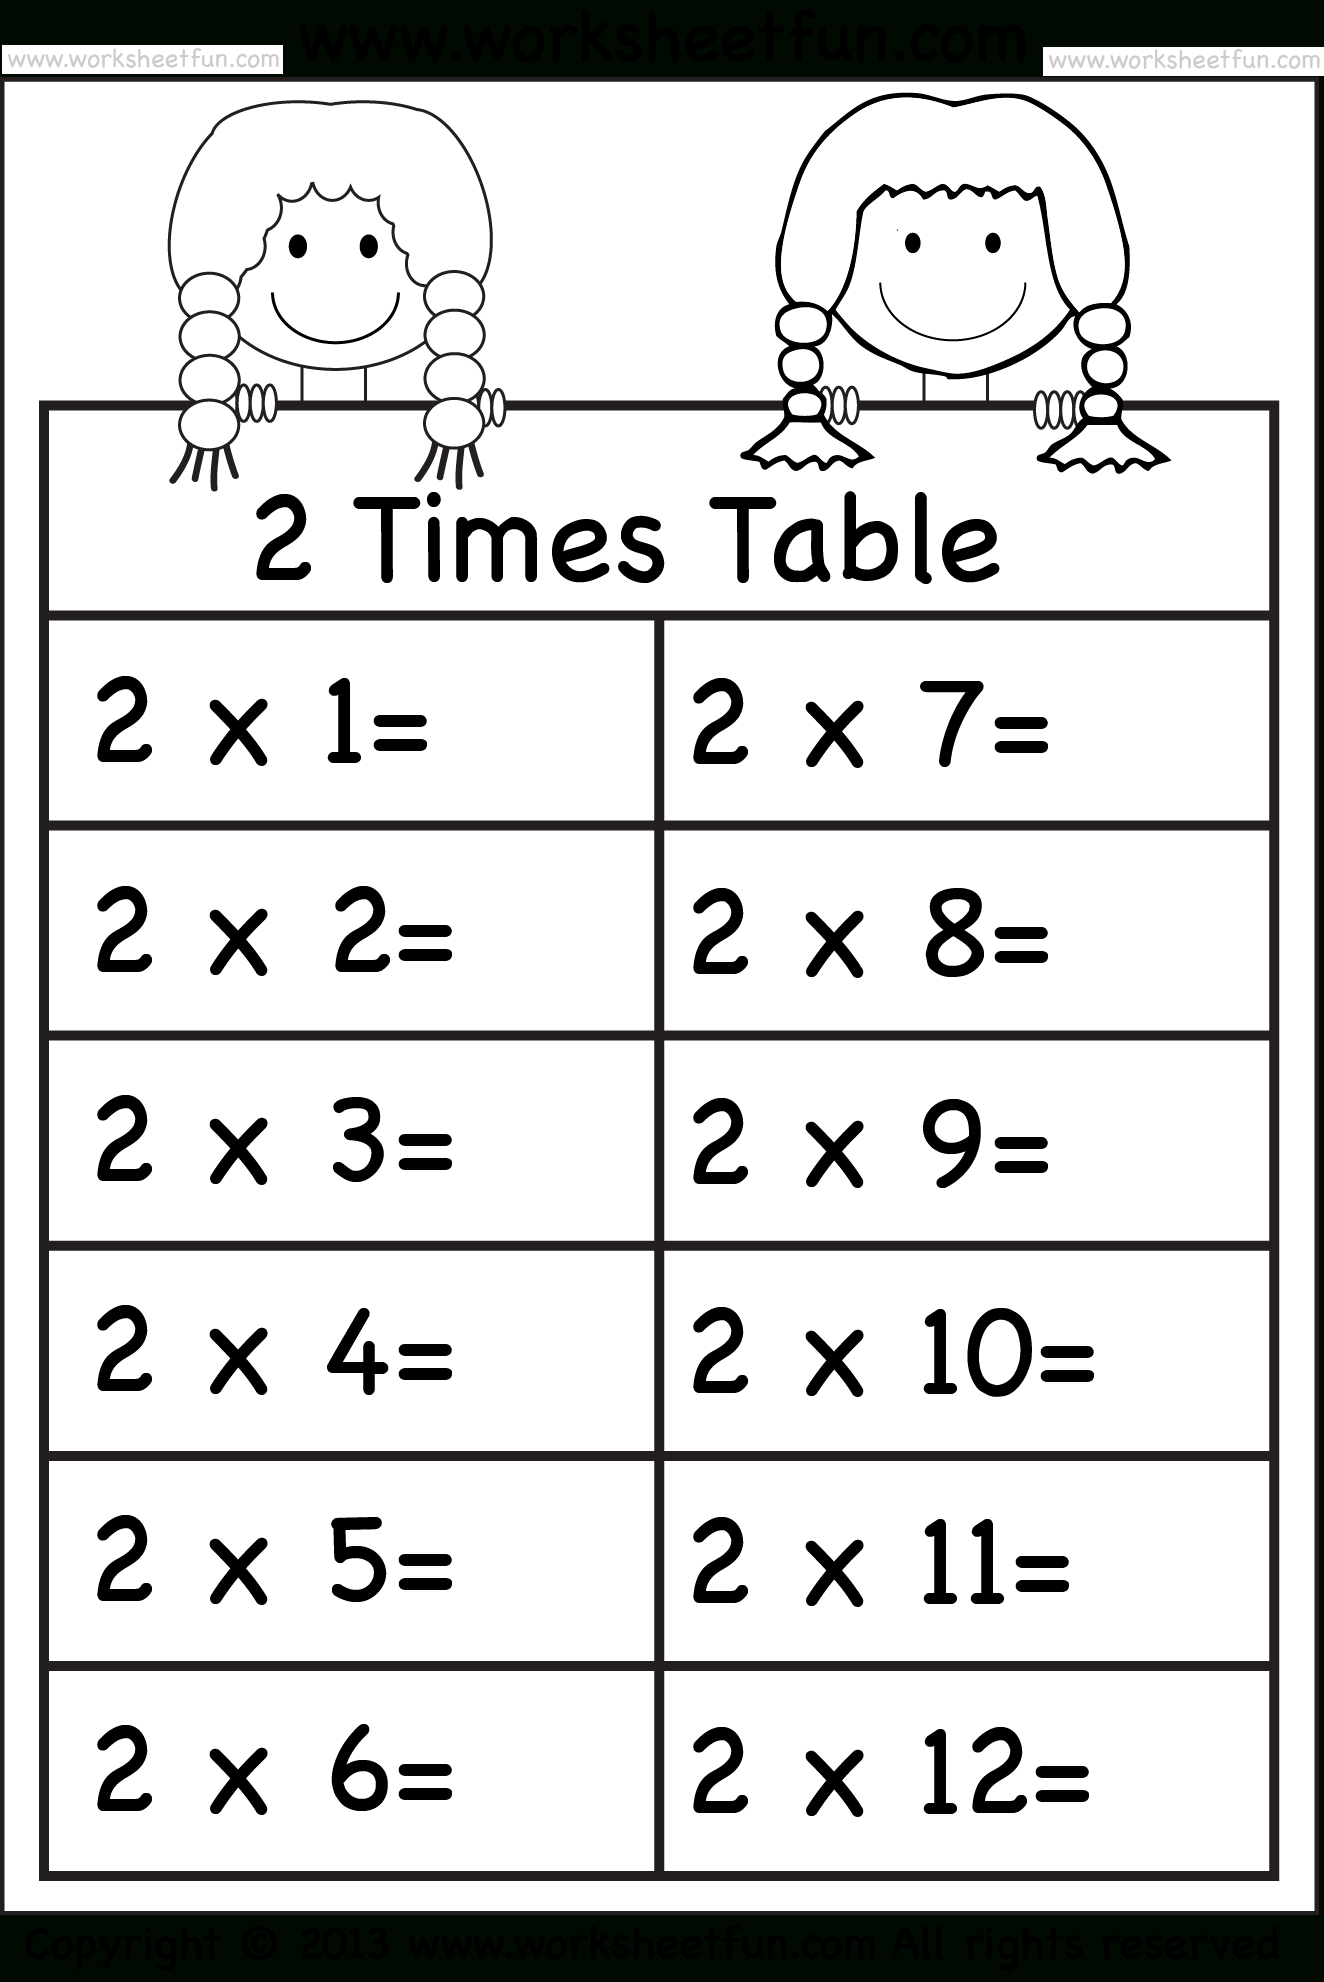 Times Tables Worksheets – 2 3 4 5 6 7 8 9 10 11 And